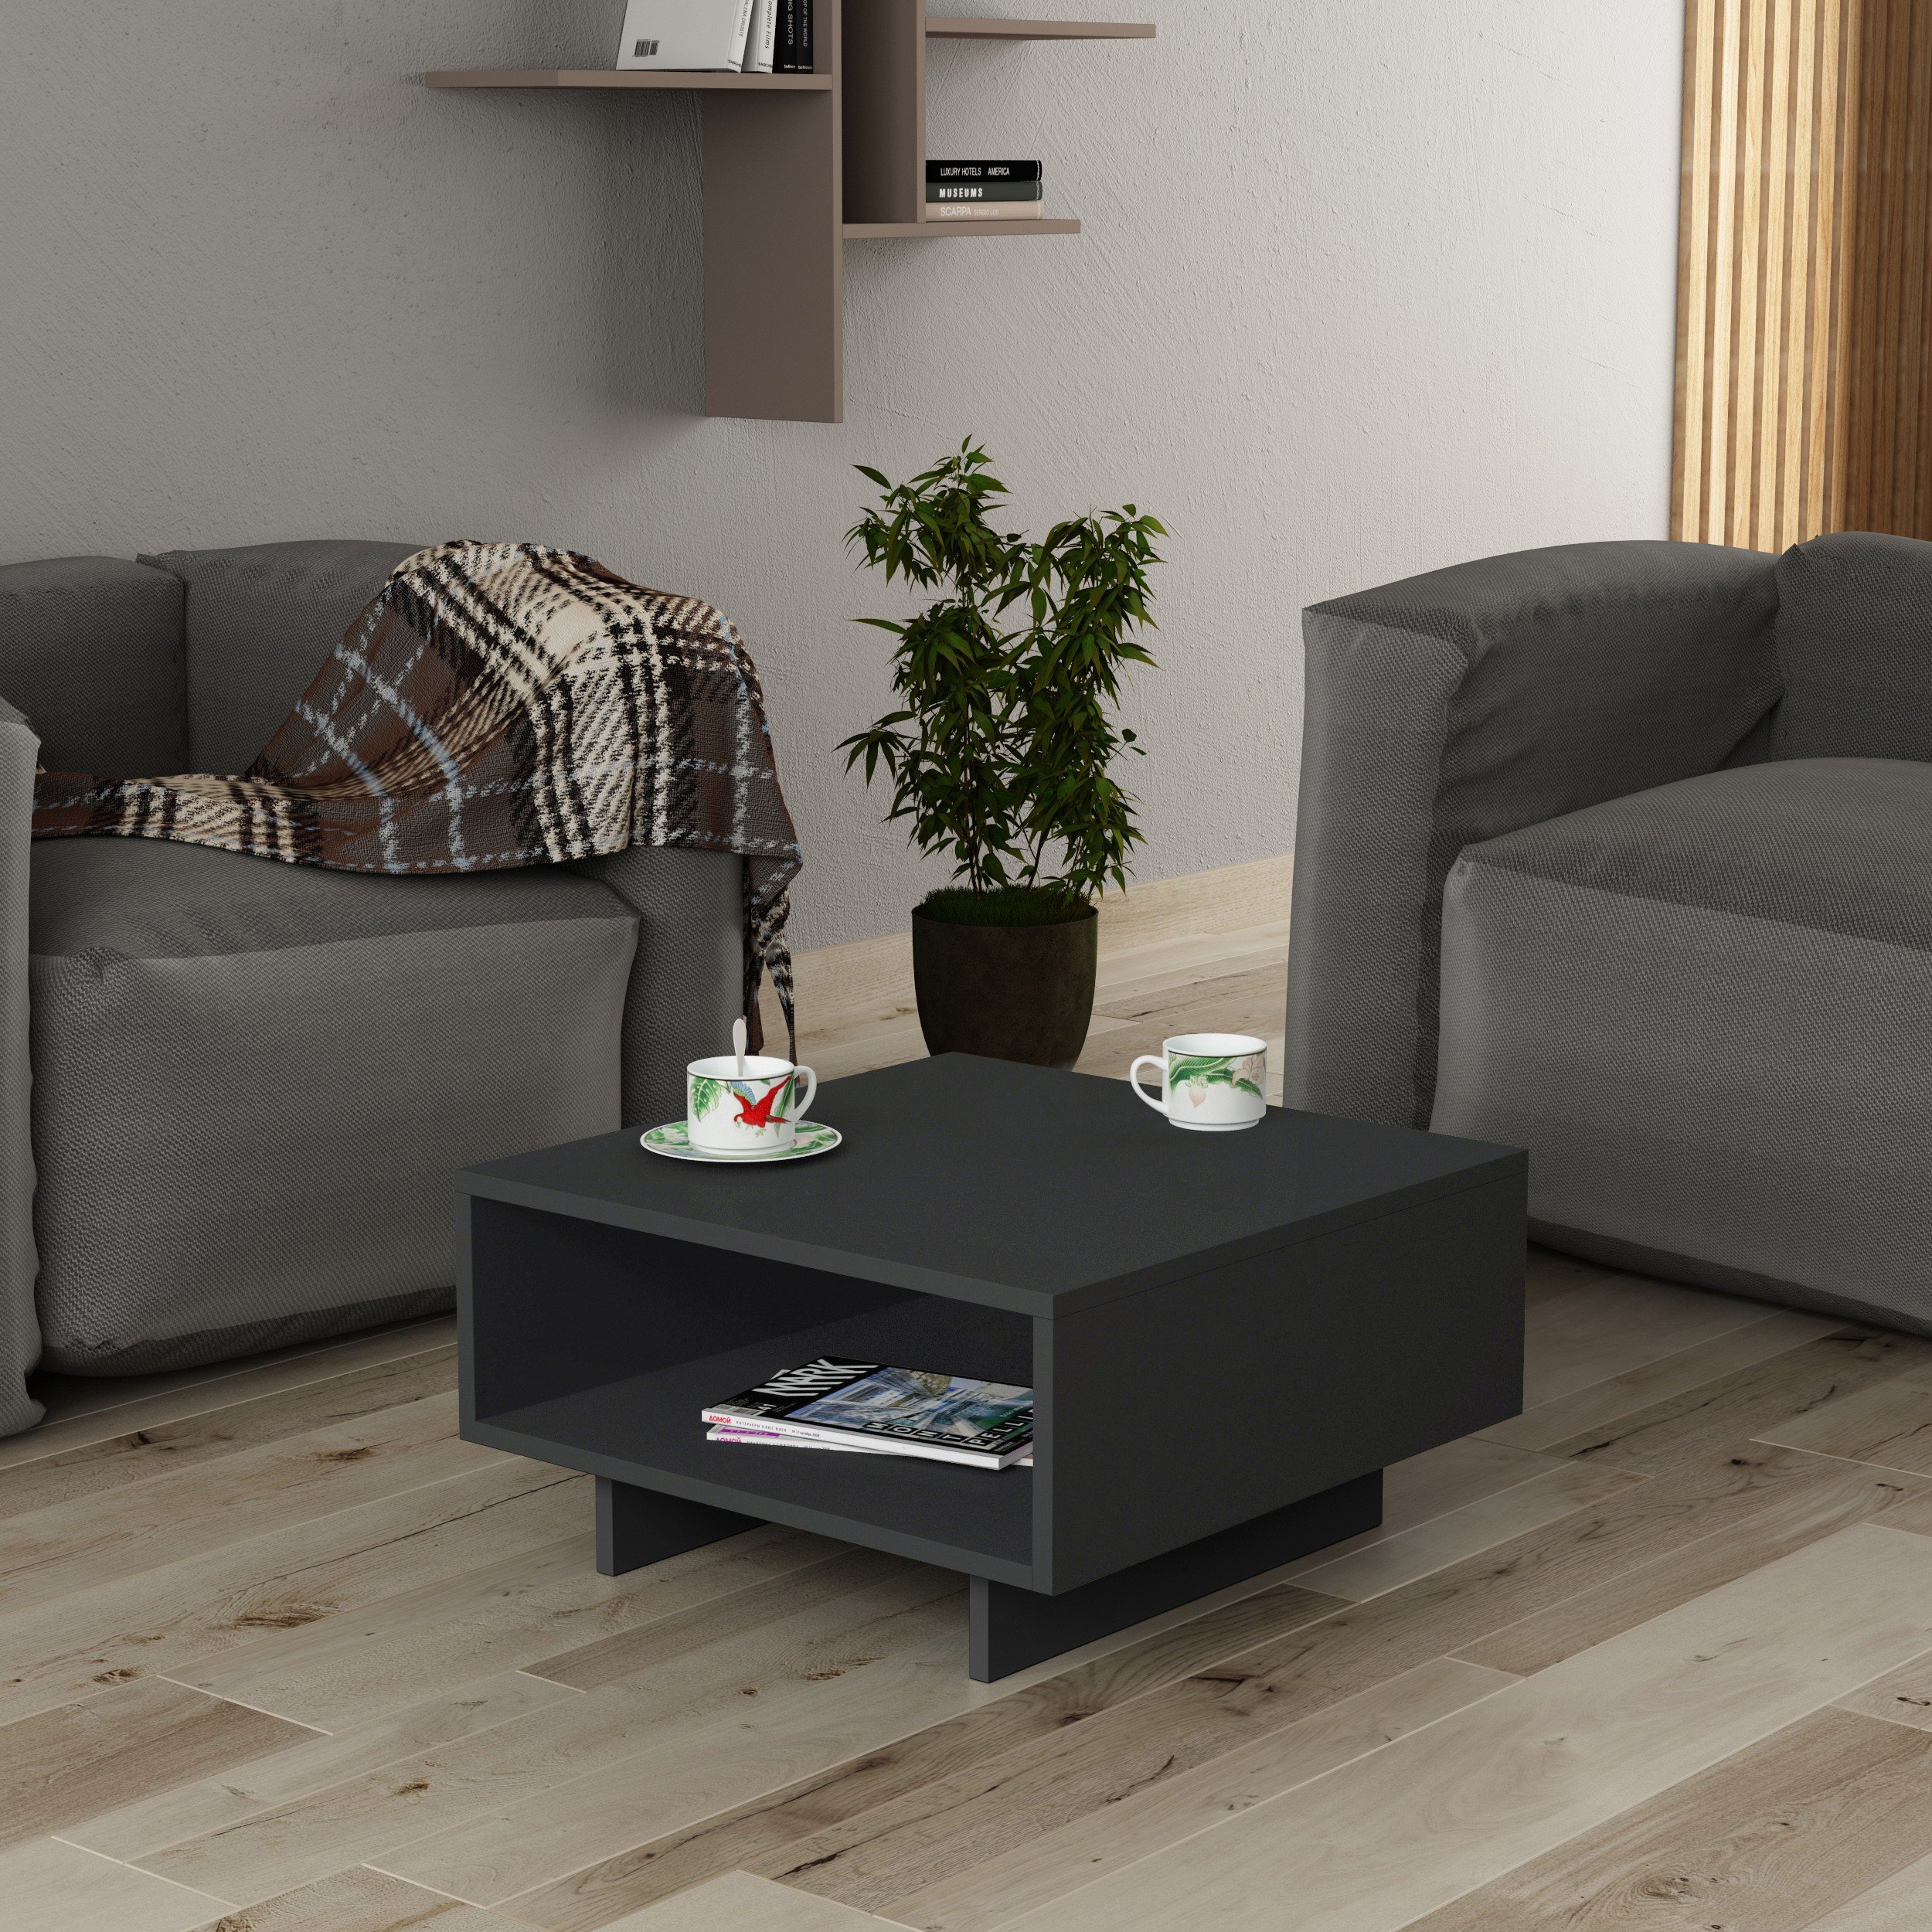 HOLA COFFEE TABLE - ANTHRACITE - ANTHRACITE - M.SH.11040.6